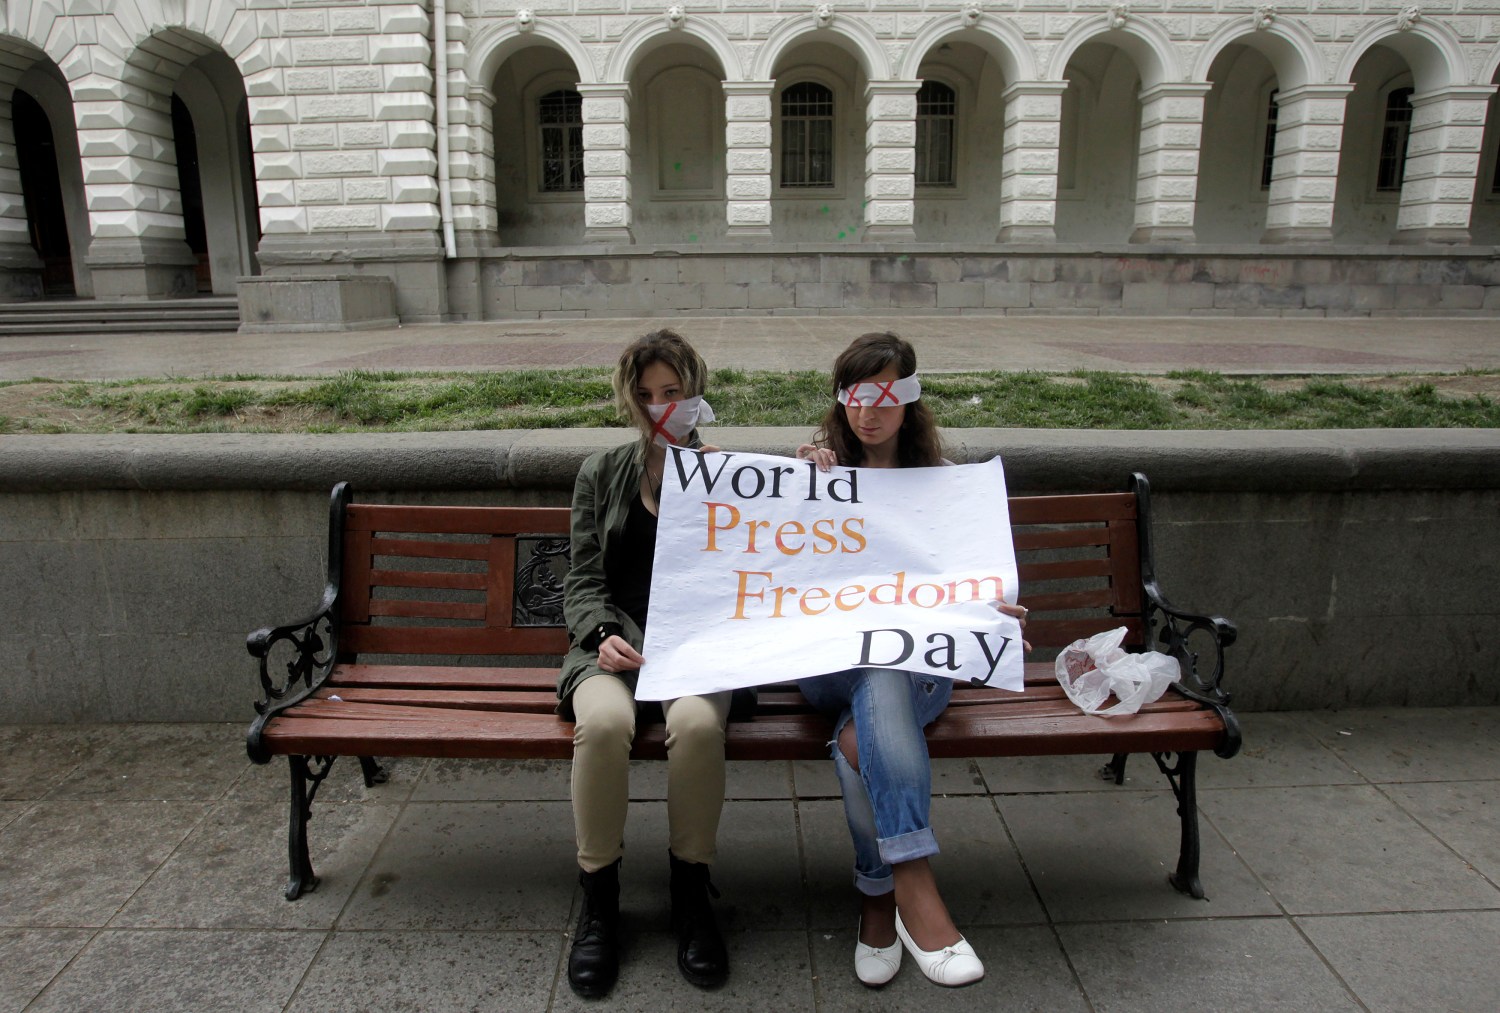 People take part in a flashmob to mark World Press Freedom Day in Tbilisi, May 3, 2012. World Press Freedom Day was proclaimed by the UN General Assembly in December 1993. REUTERS/David Mdzinarishvili